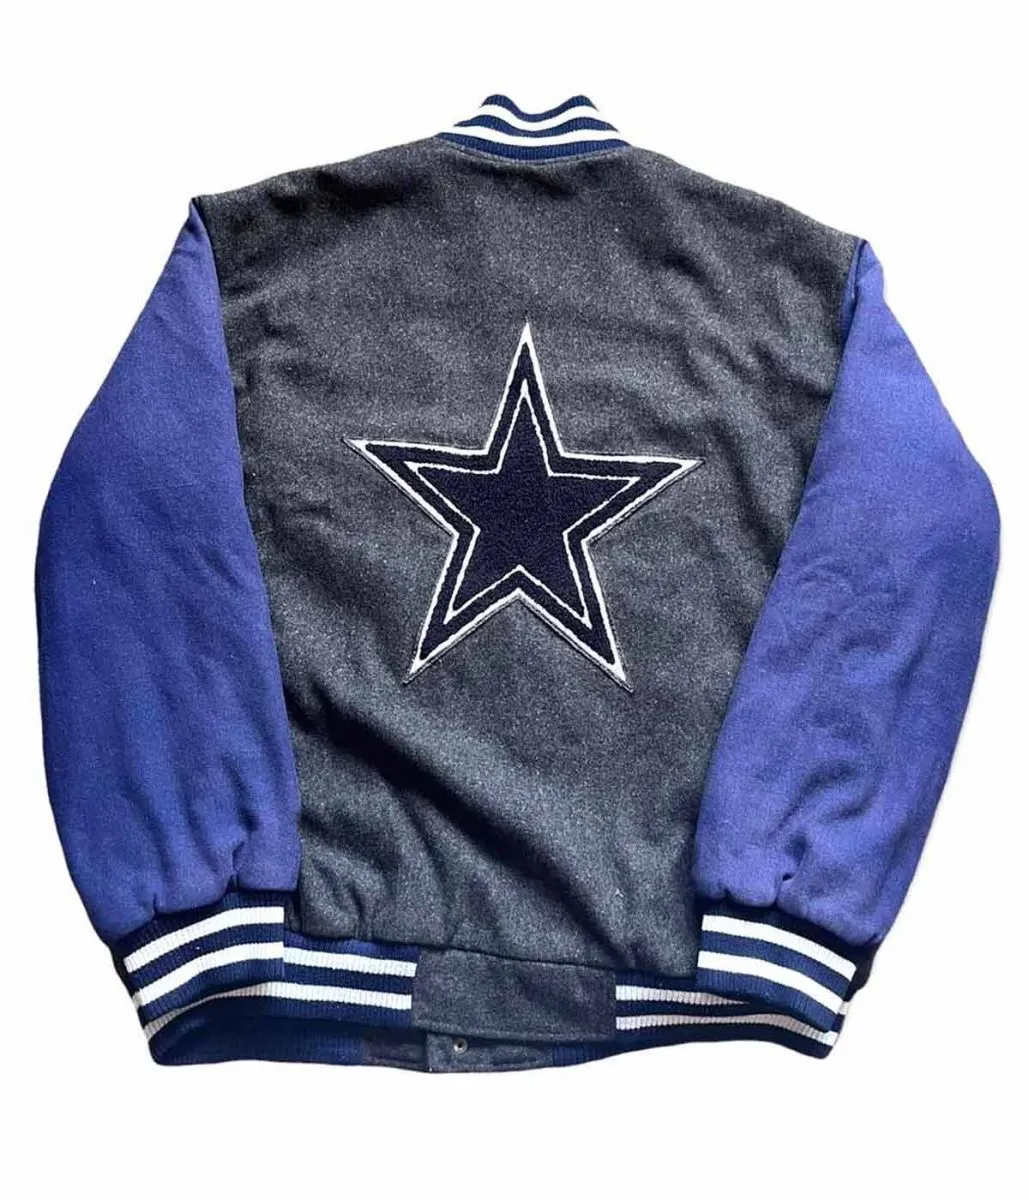 Dallas Cowboys Wool Gray and Blue Letterman Jackets